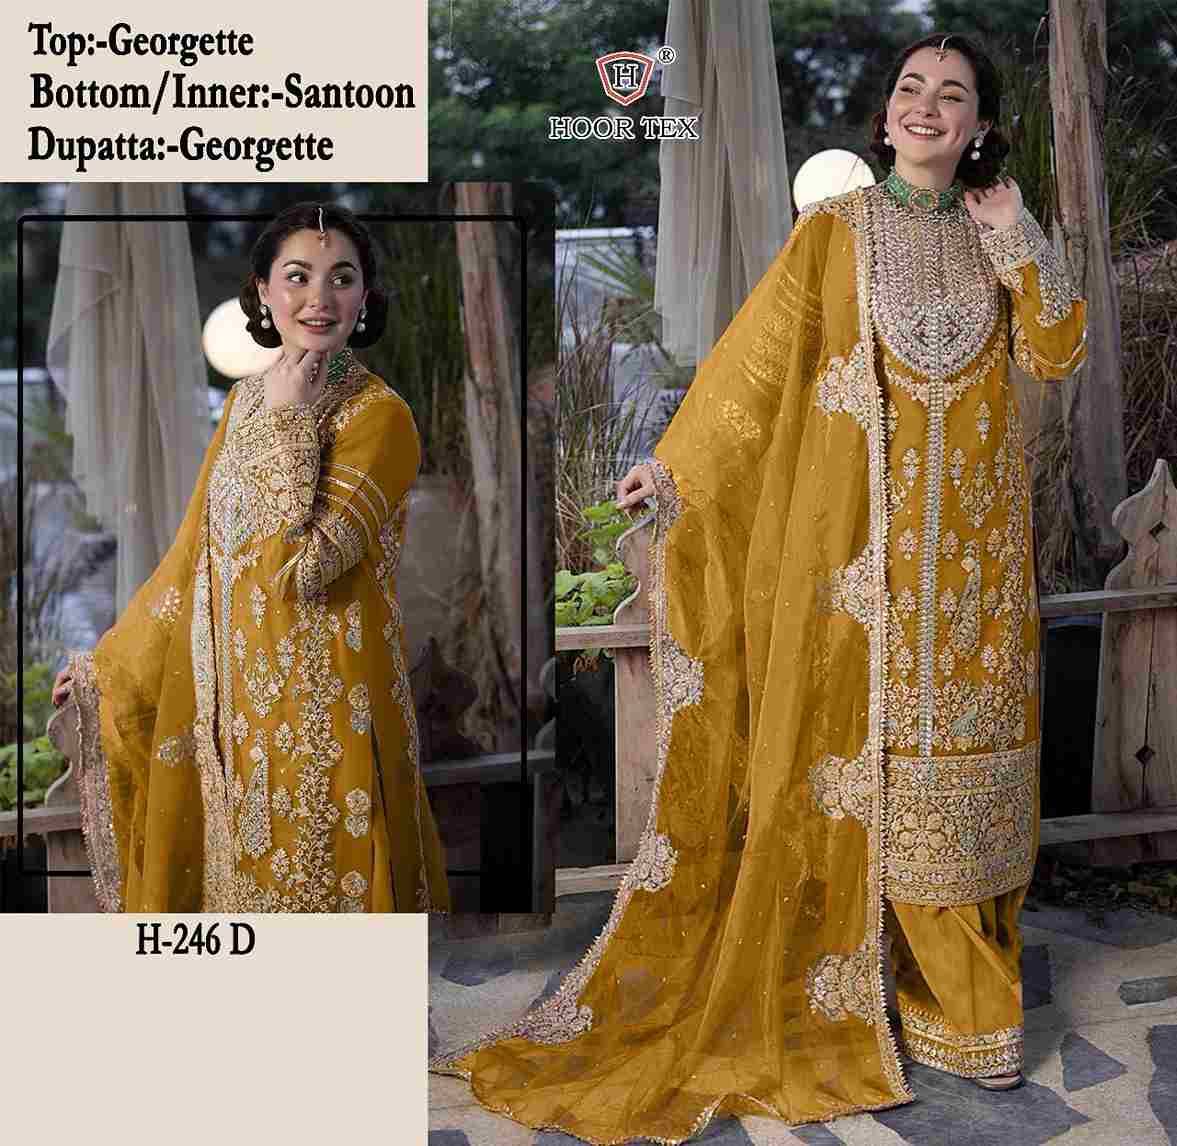 Hoor Tex Hit Design H-246 Colours By Hoor Tex H-246-A To H-246-E Series Beautiful Pakistani Suits Stylish Colorful Fancy Casual Wear & Ethnic Wear Faux Georgette Embroidered Dresses At Wholesale Price